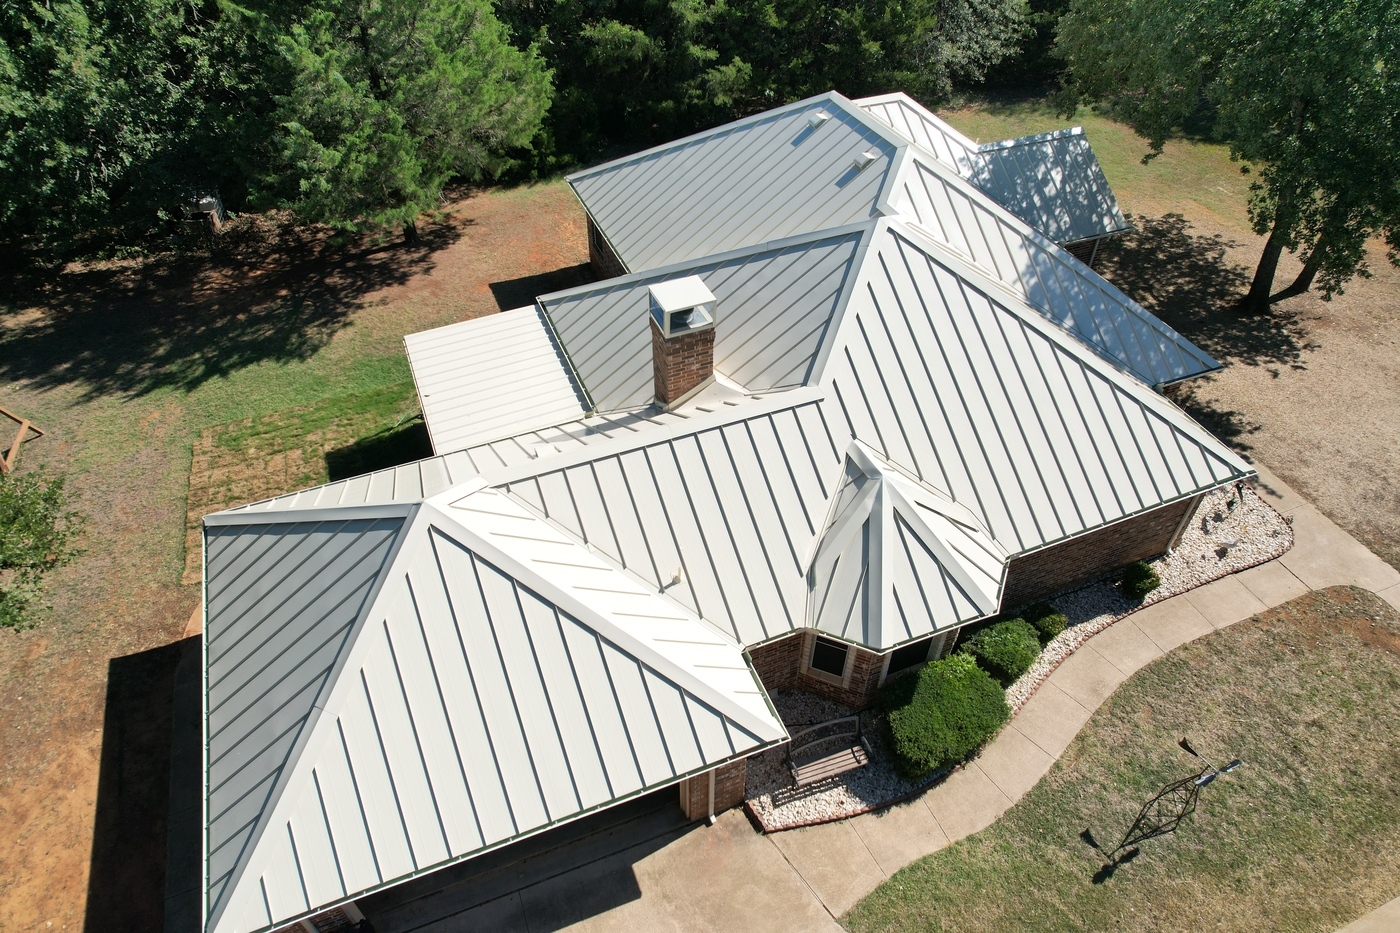 GreenLight Roofing and Remodeling offers roofing, windows, and siding services, as well as insulation and energy-efficient upgrades, to customers in Fort Worth, Weatherford, Cleburne, Alvarado, and across Tarrant, Johnson, Hood, Parker, Bosque, and Somervell County